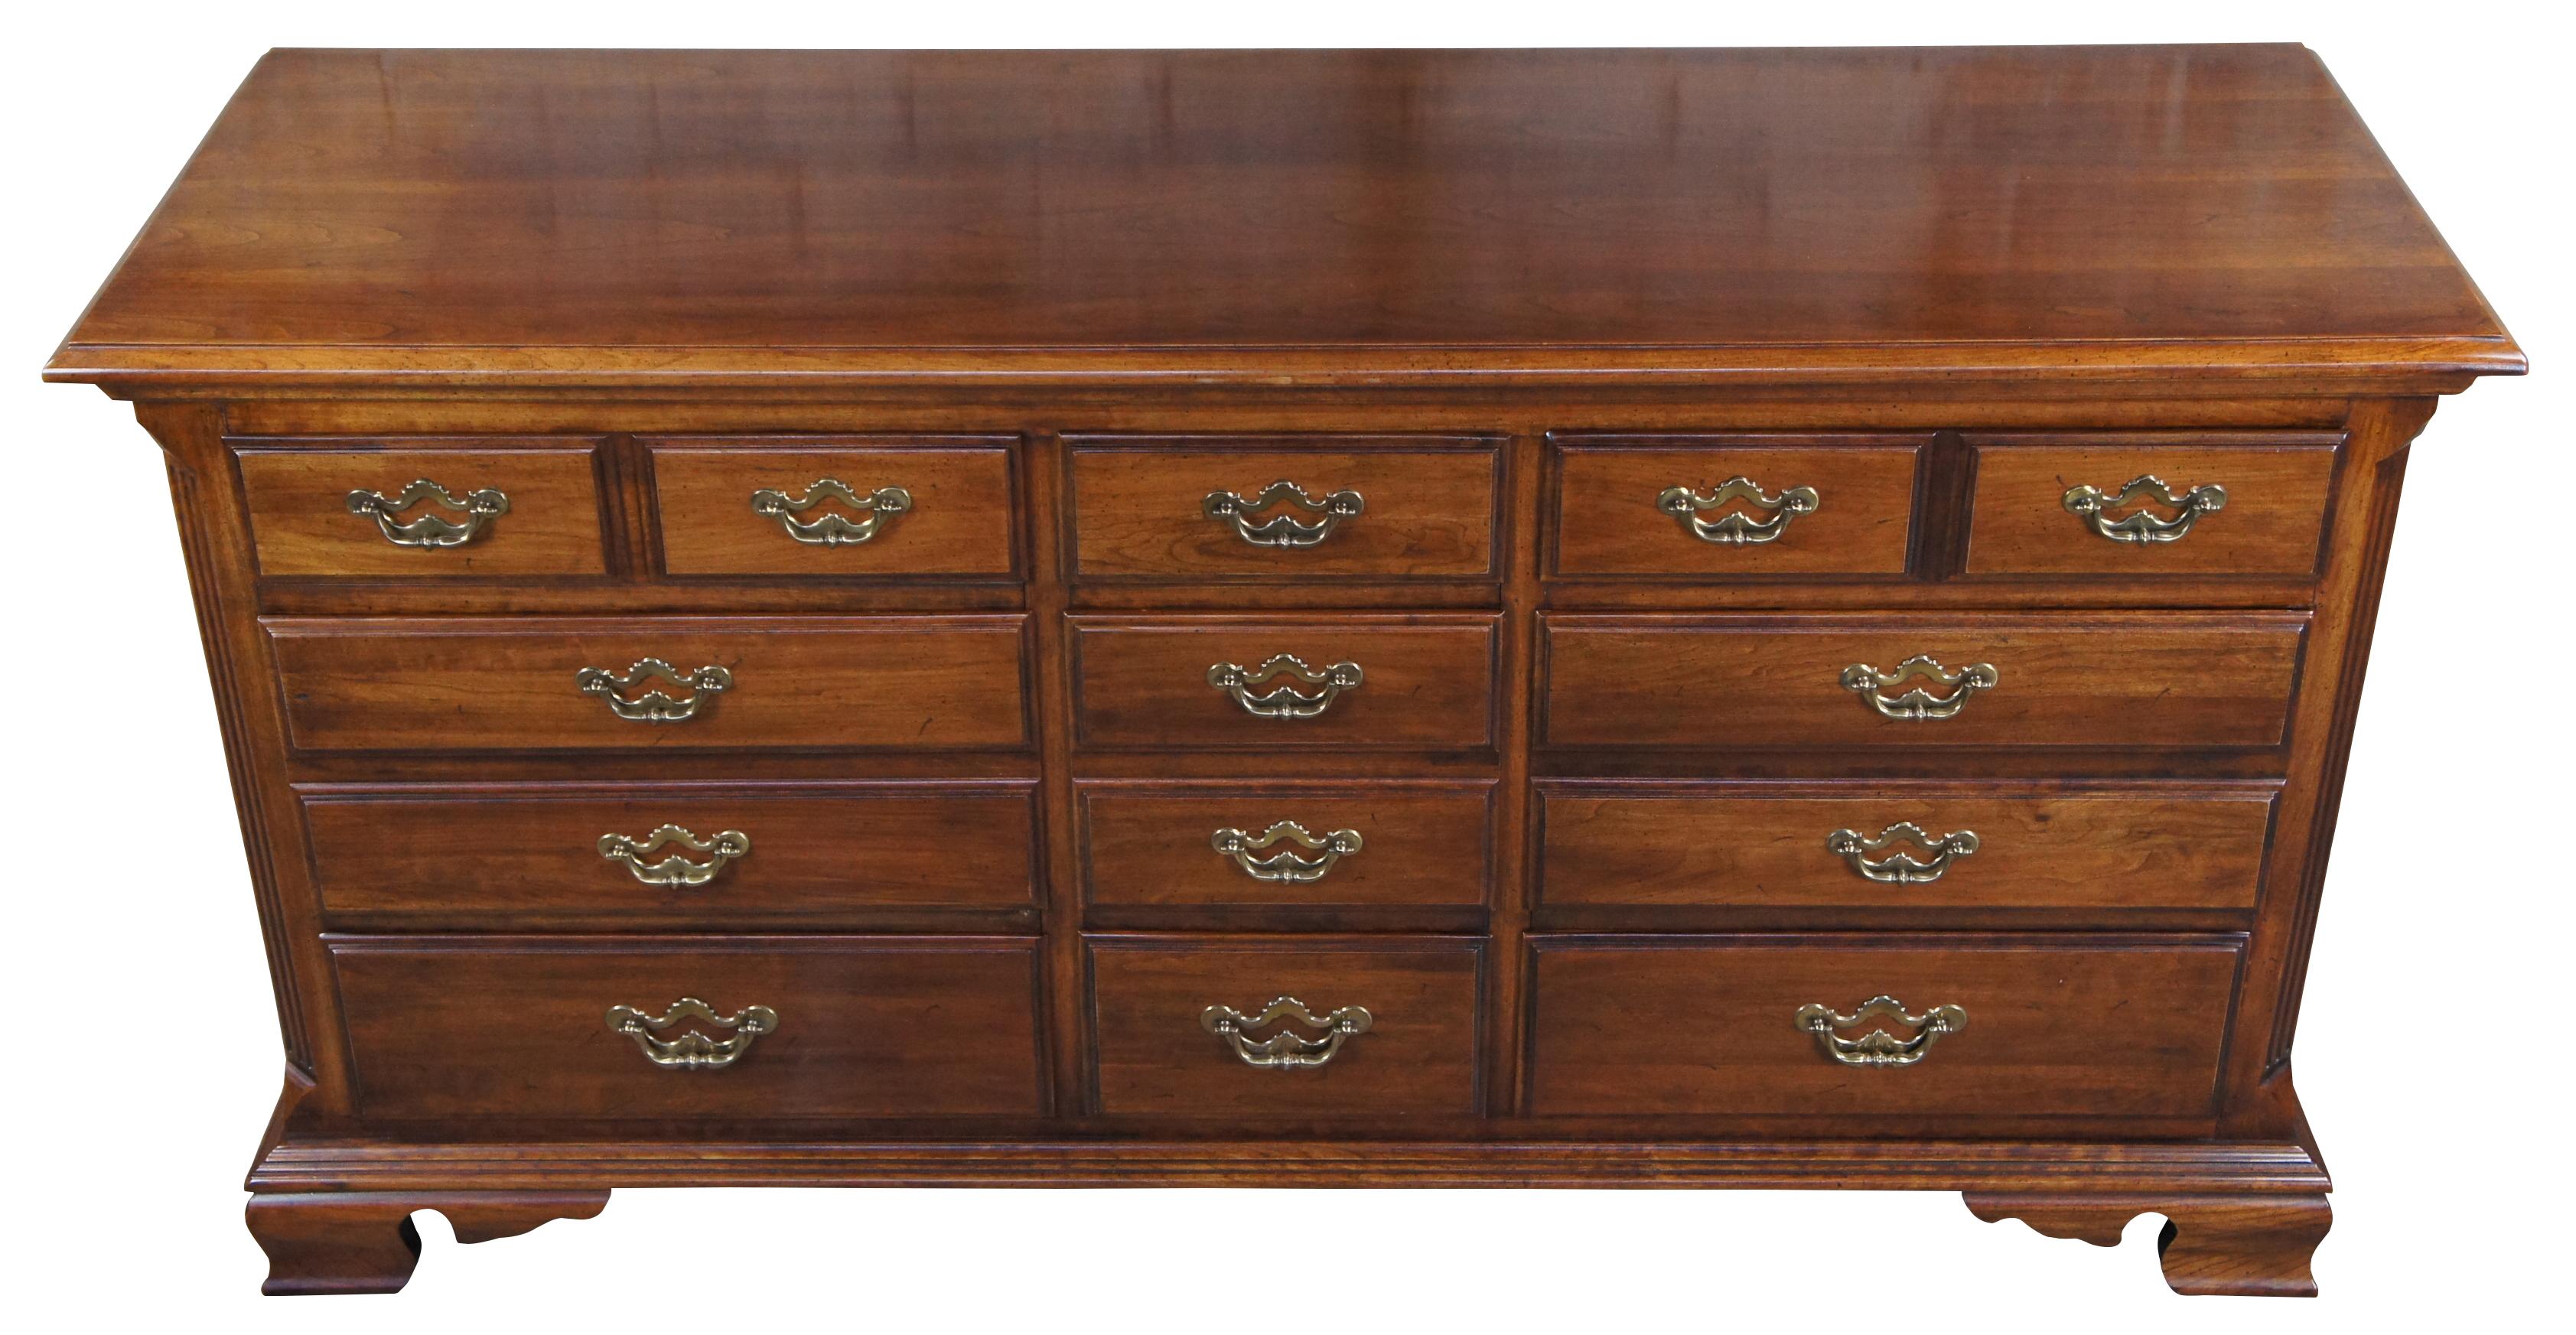 Thomasville Collectors Cherry Georgian style triple dresser, circa 1978. Features a long rectangular cherry case with nine dovetailed drawers and brass bale hardware. Includes a naturally distressed frame, tall mirror with open pediment and